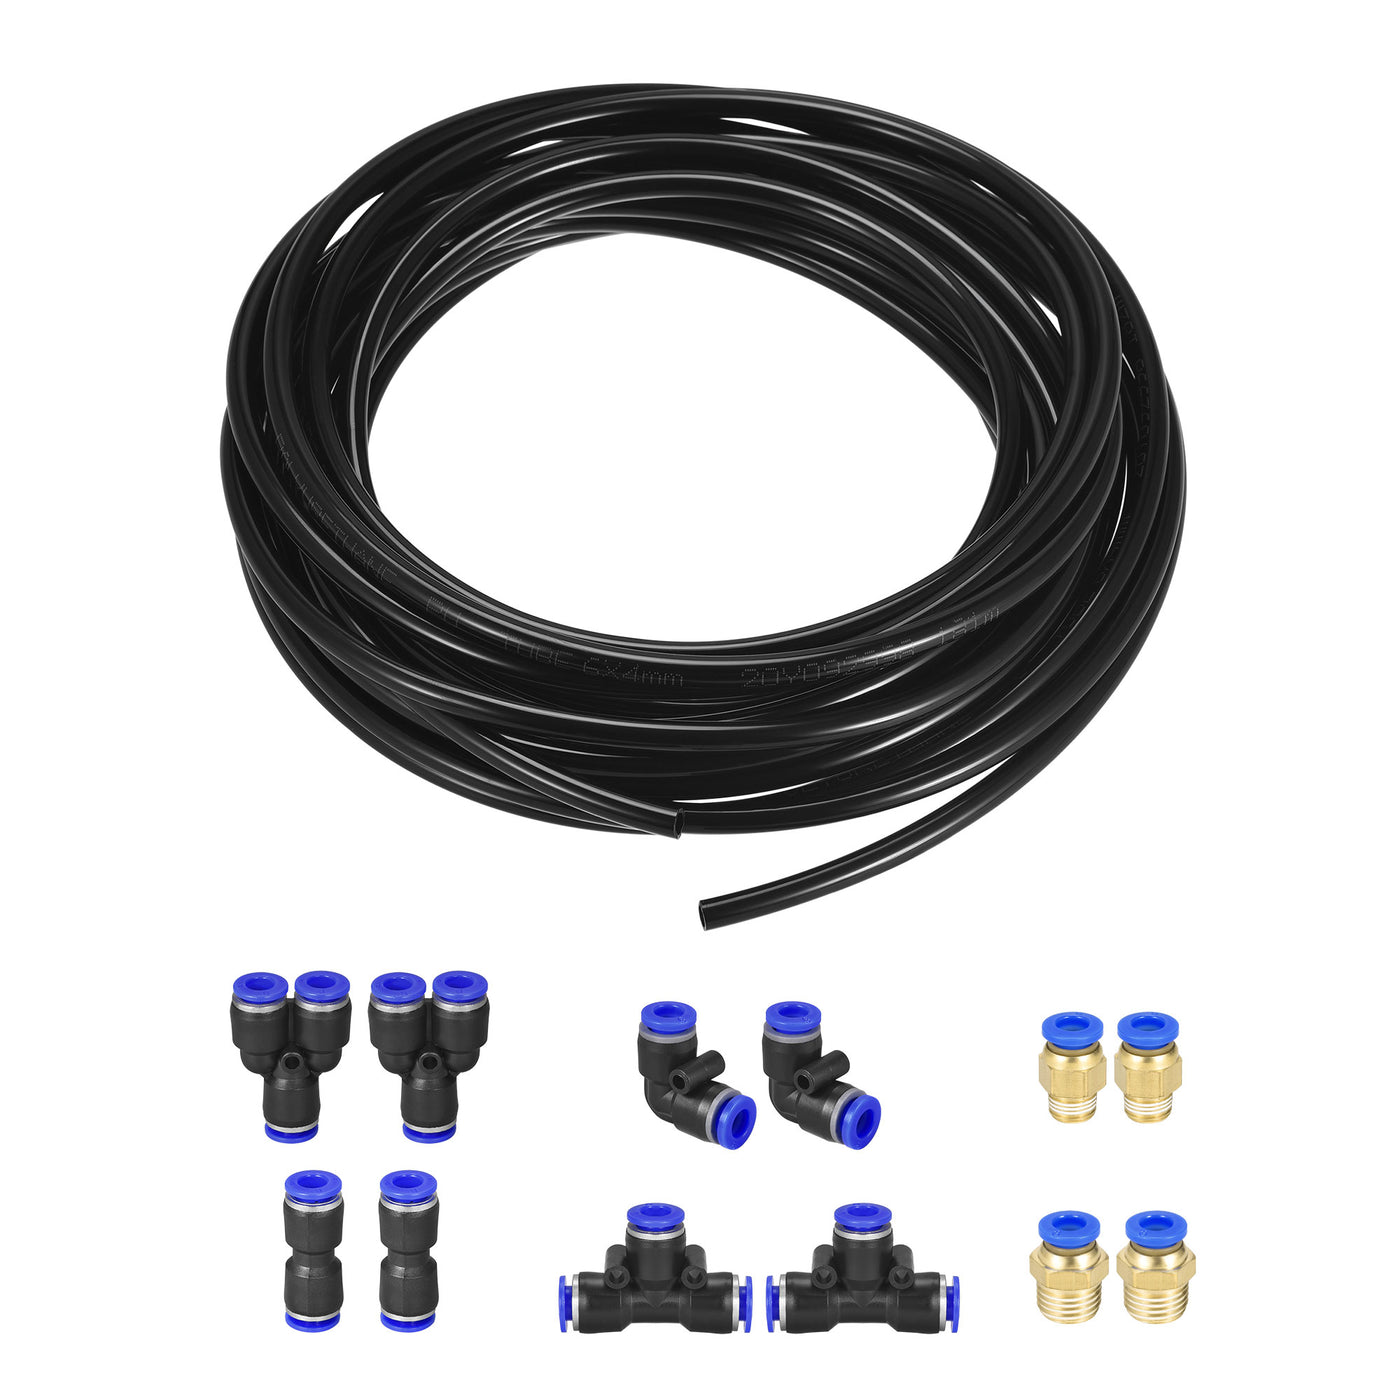 uxcell Uxcell Pneumatic Air Hose Tubing PU Air Compressor Tube 4mm/0.16''ID x 6mm/0.23''OD x 10m/32.8Ft Polyurethane Pipe Black with Connect Fitting Kit